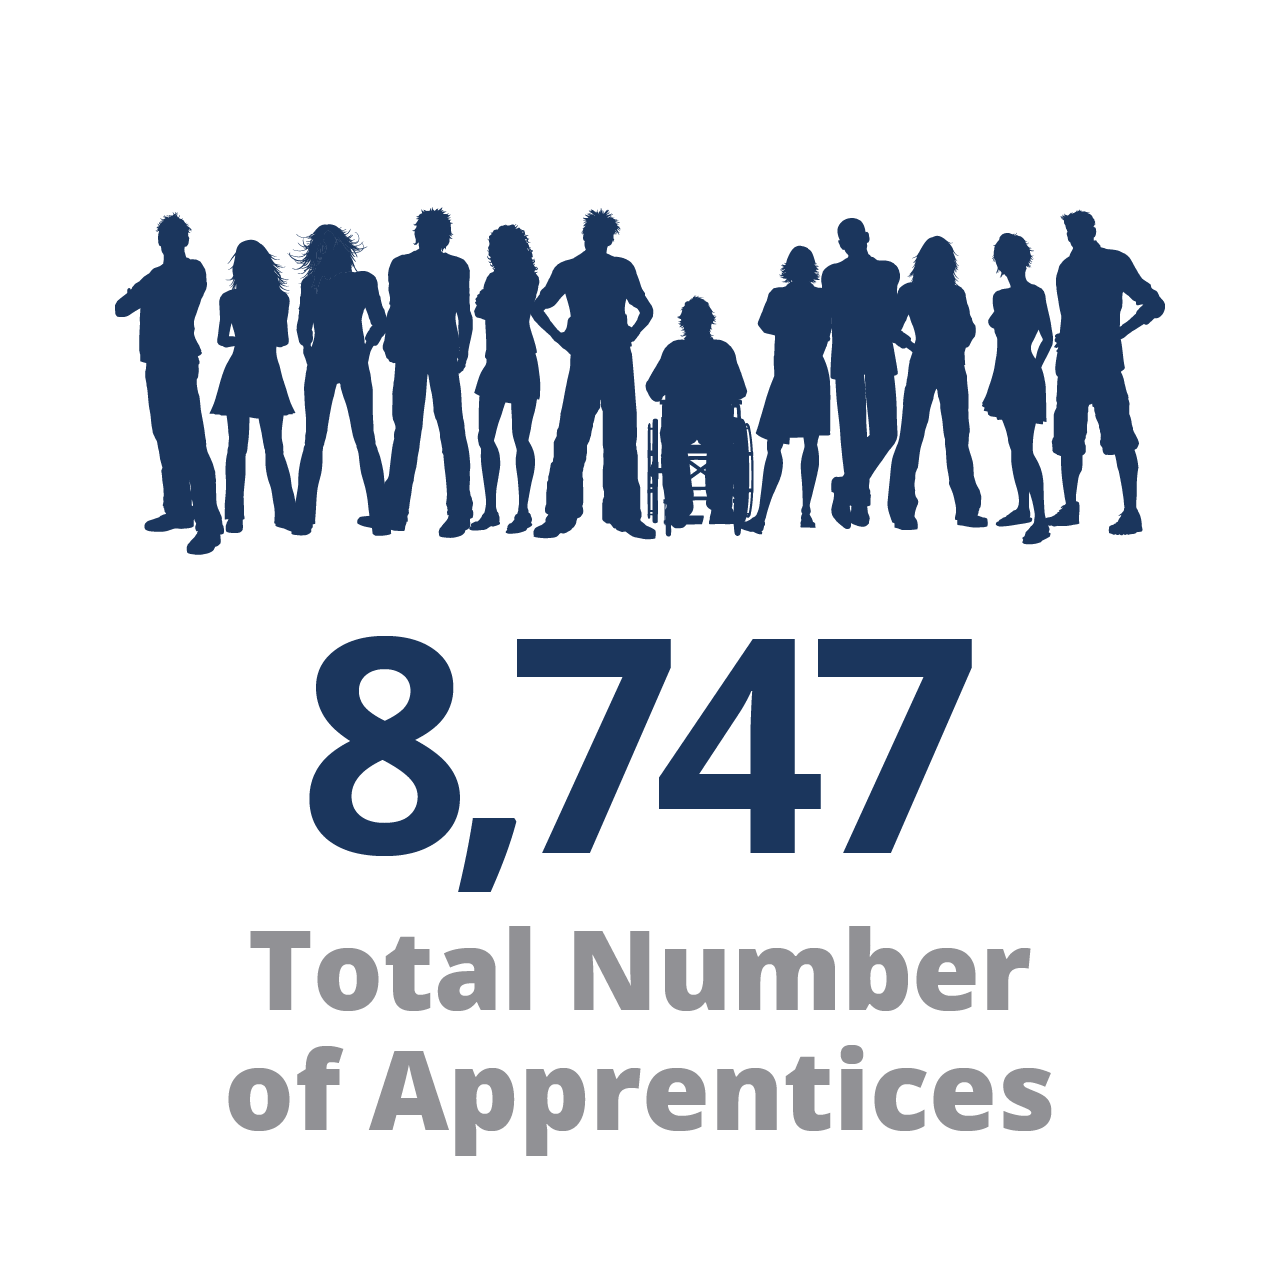 6,957 Total Number of Apprentices